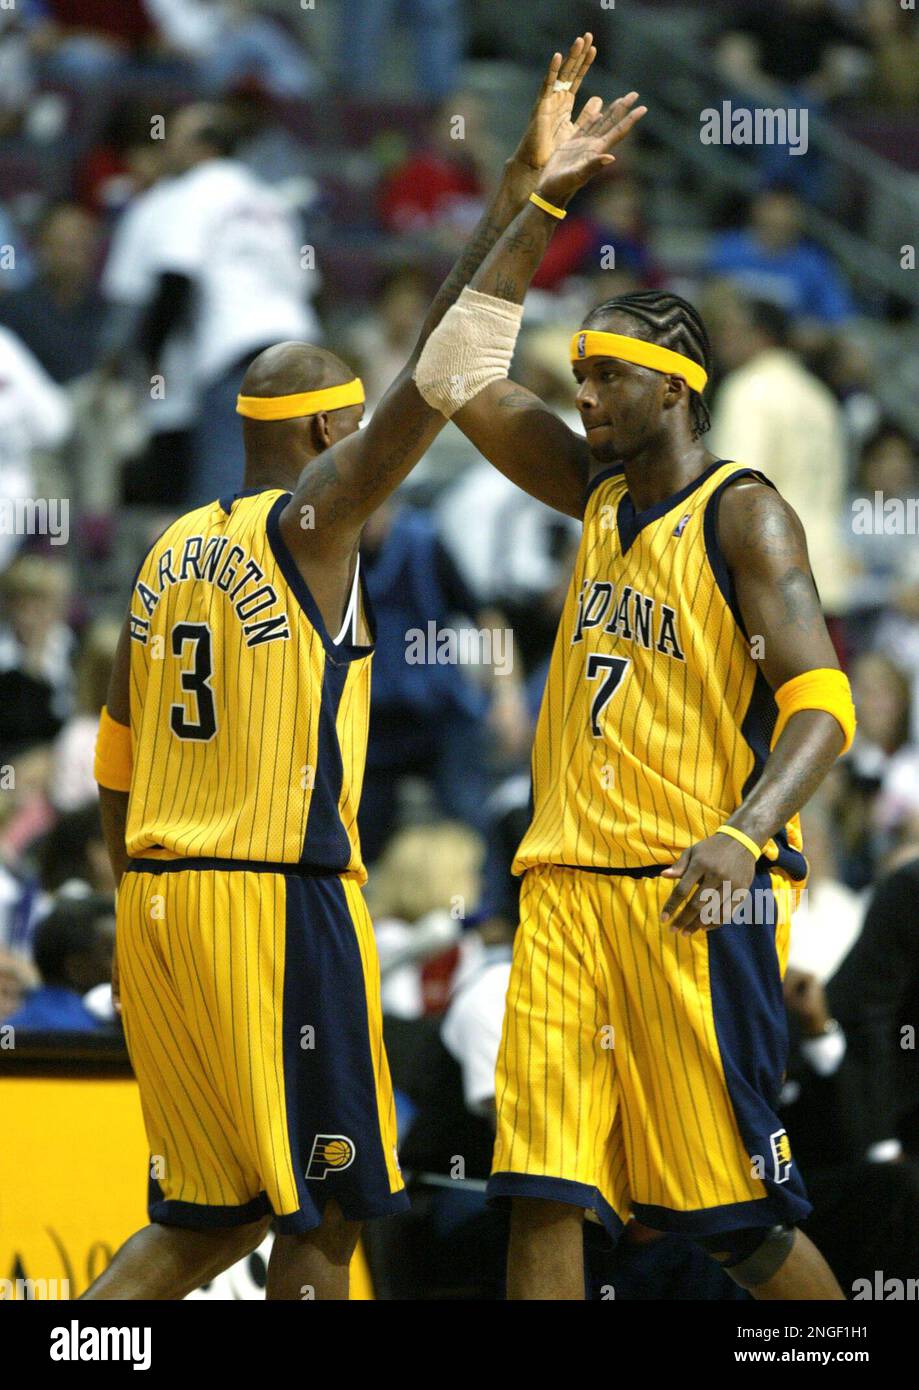 2000s Pacers at a Glance: Jermaine O'Neal Photo Gallery